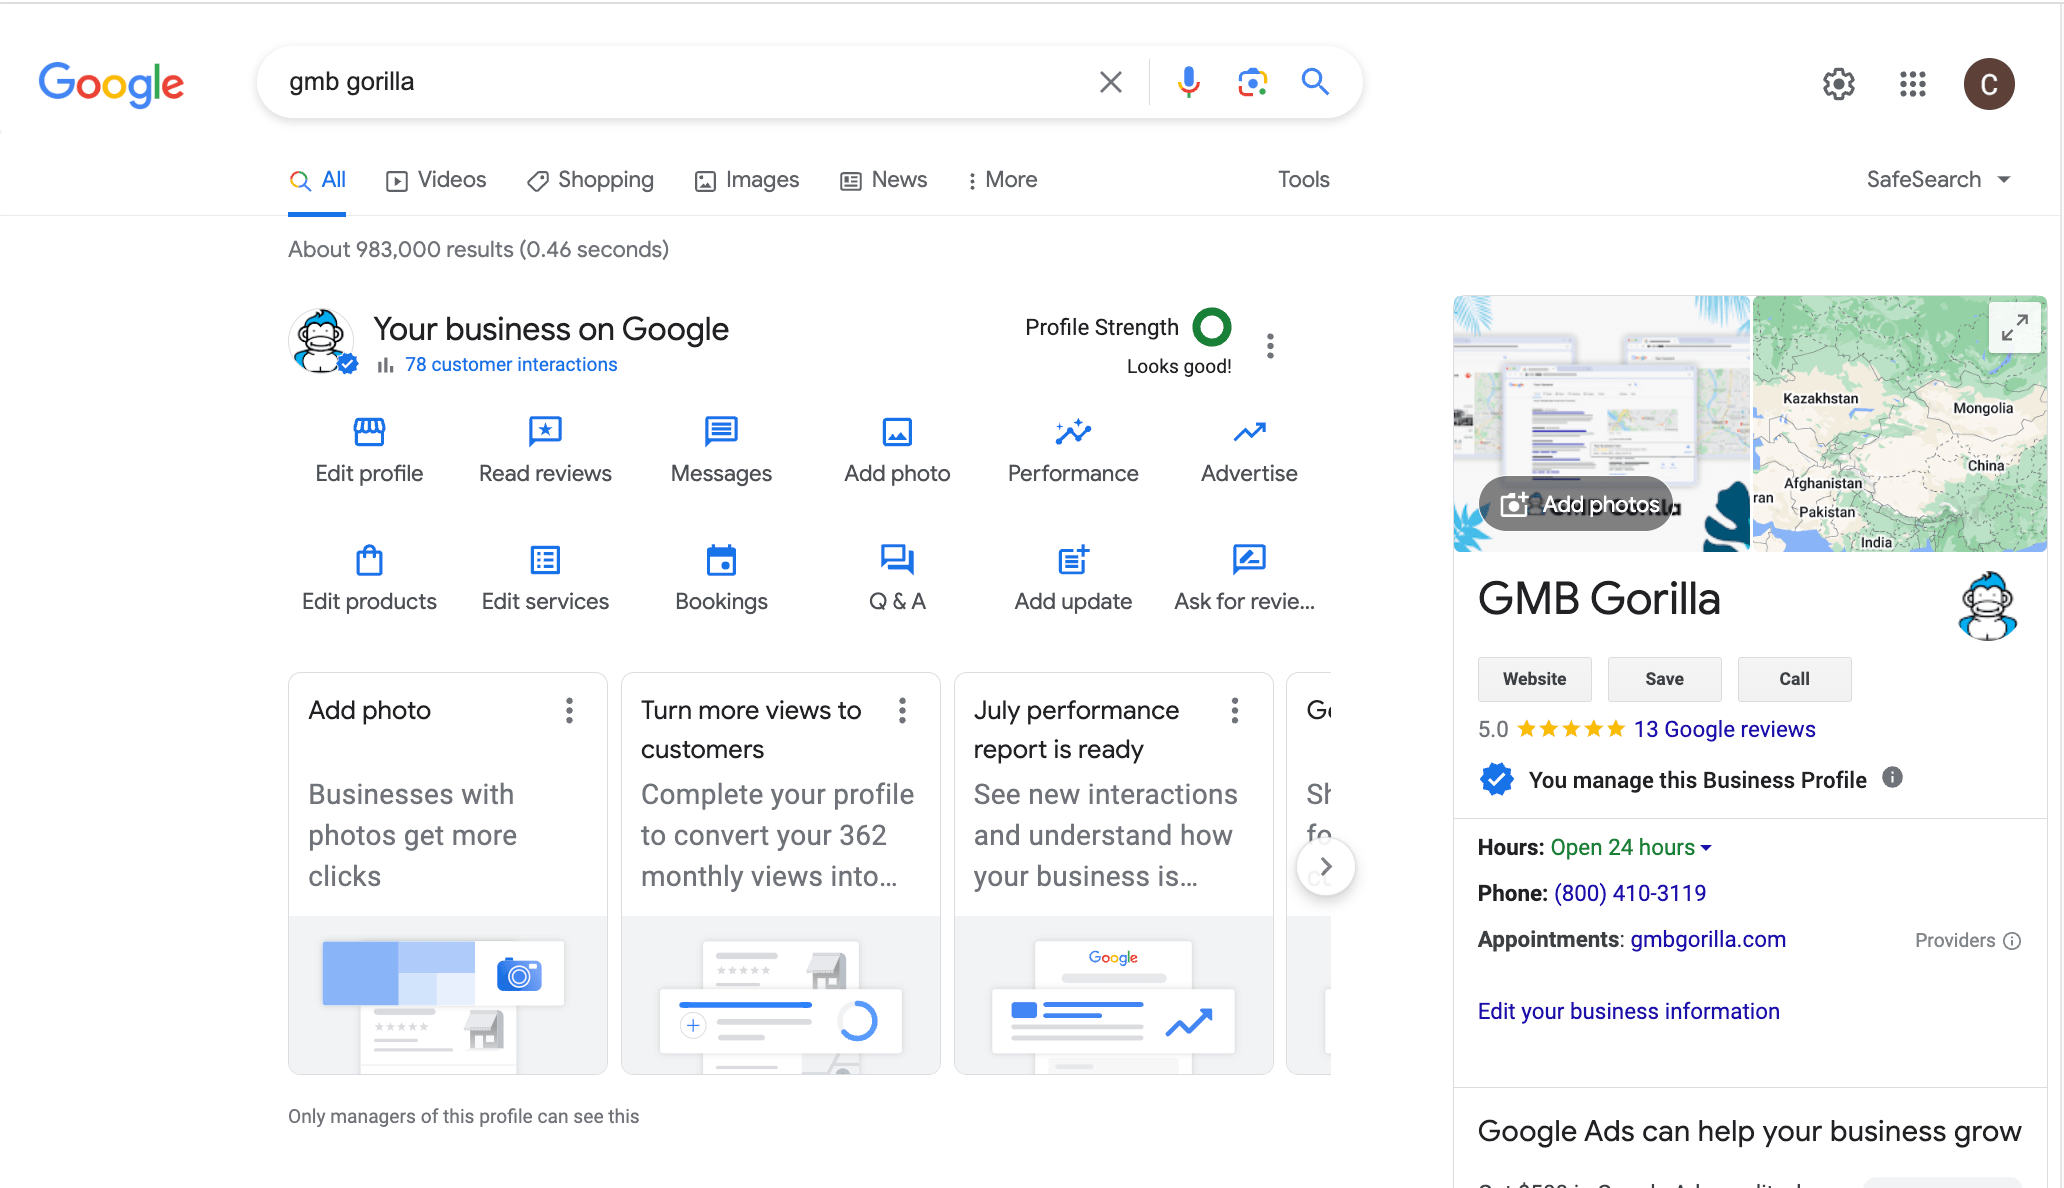 image of search engine results page with knowledge panel